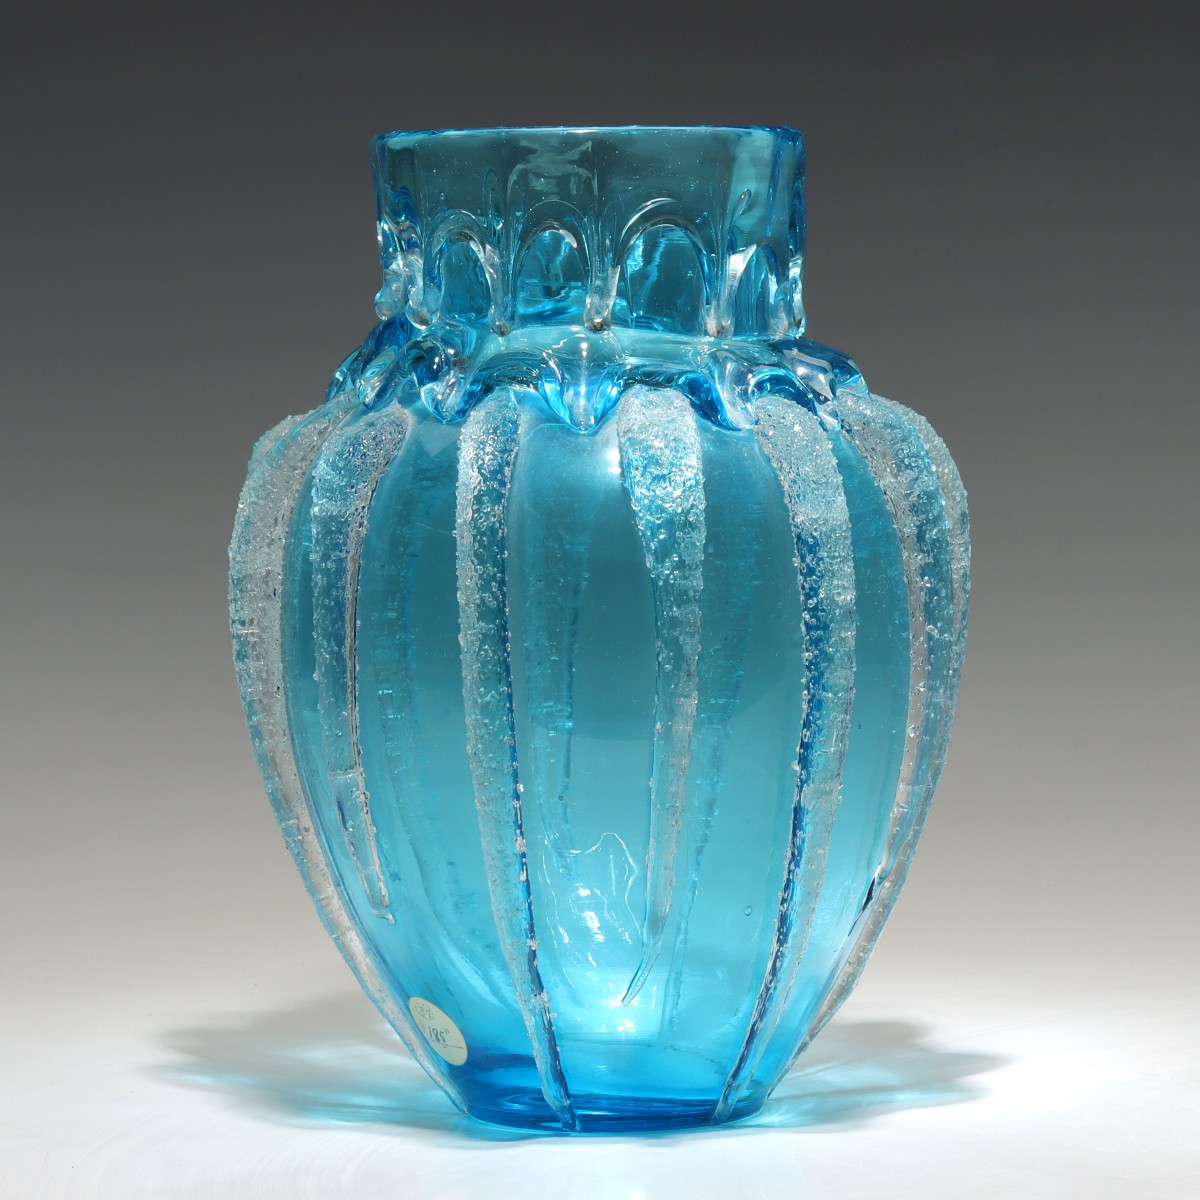 A LARGE BLUE BOSTON AND SANDWICH ICICLE VASE